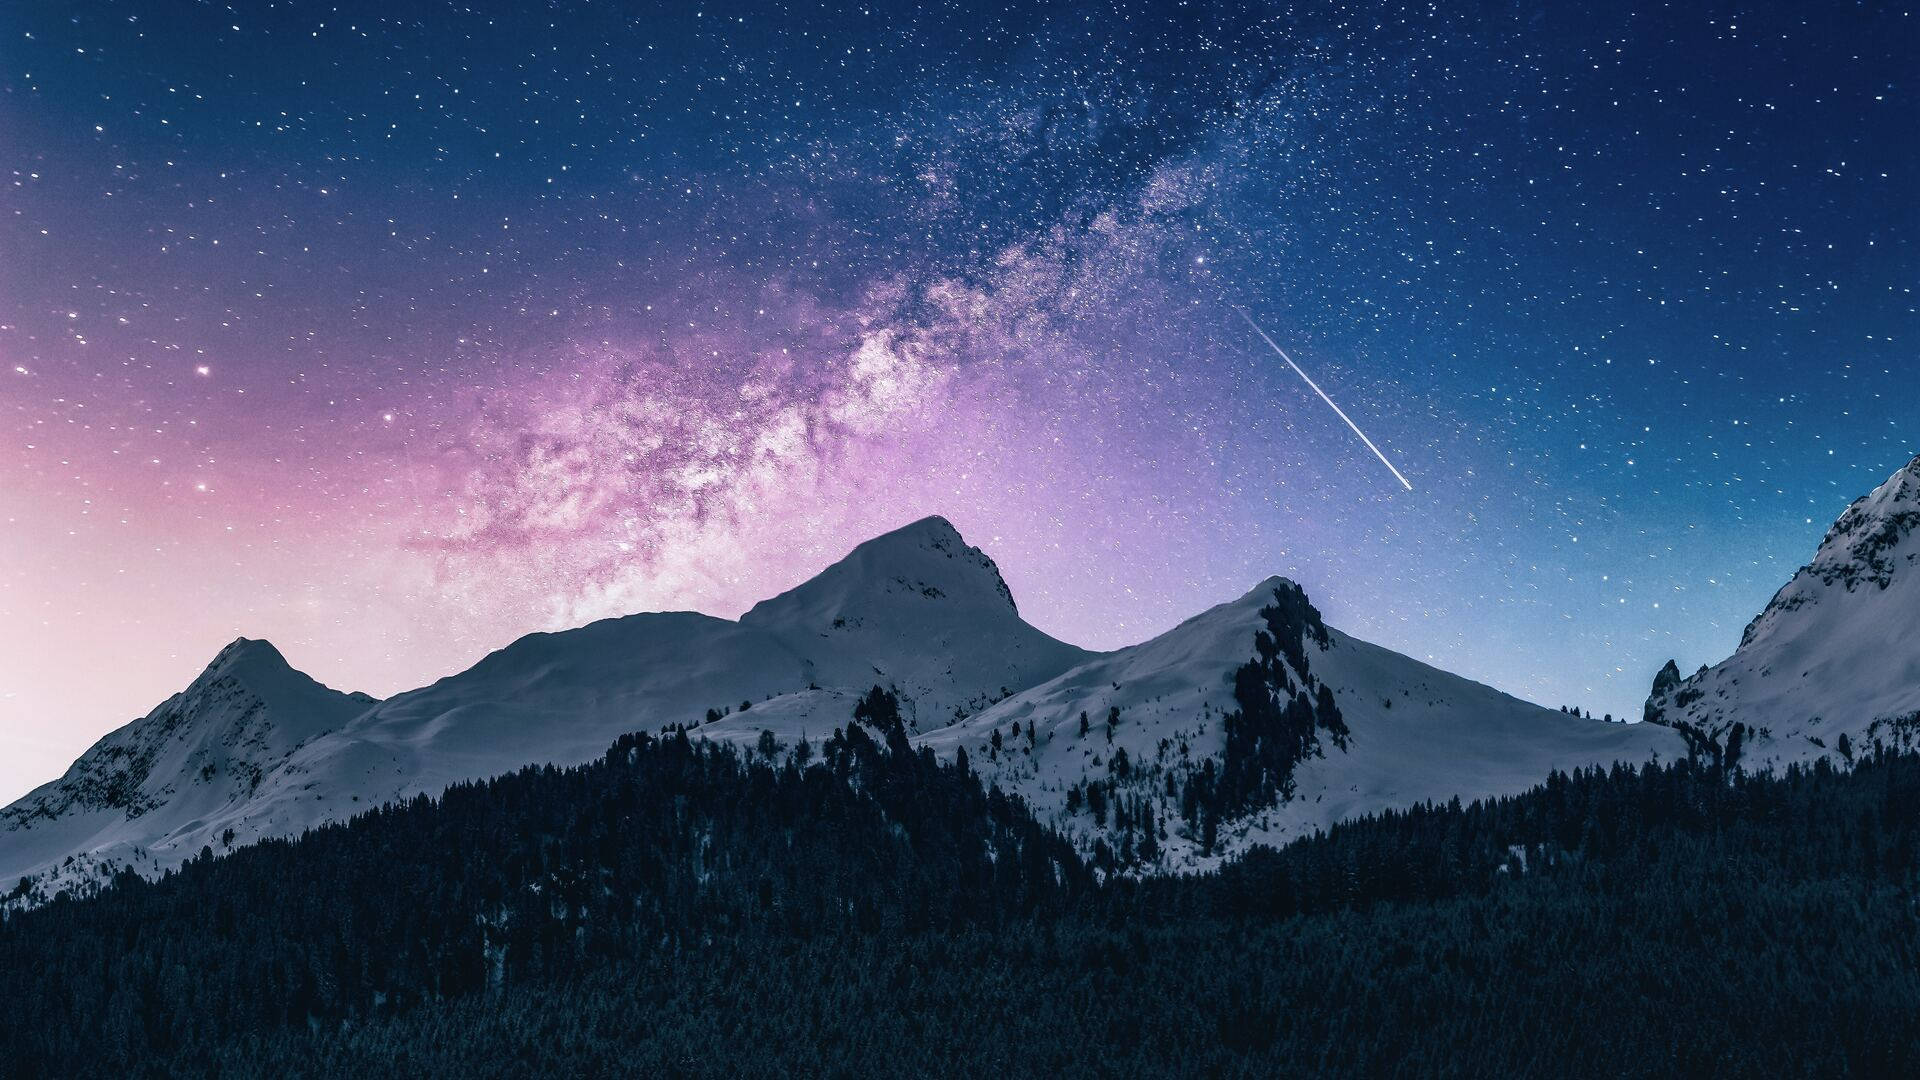 Shooting Star Over Mountain Aesthetic Landscape Background